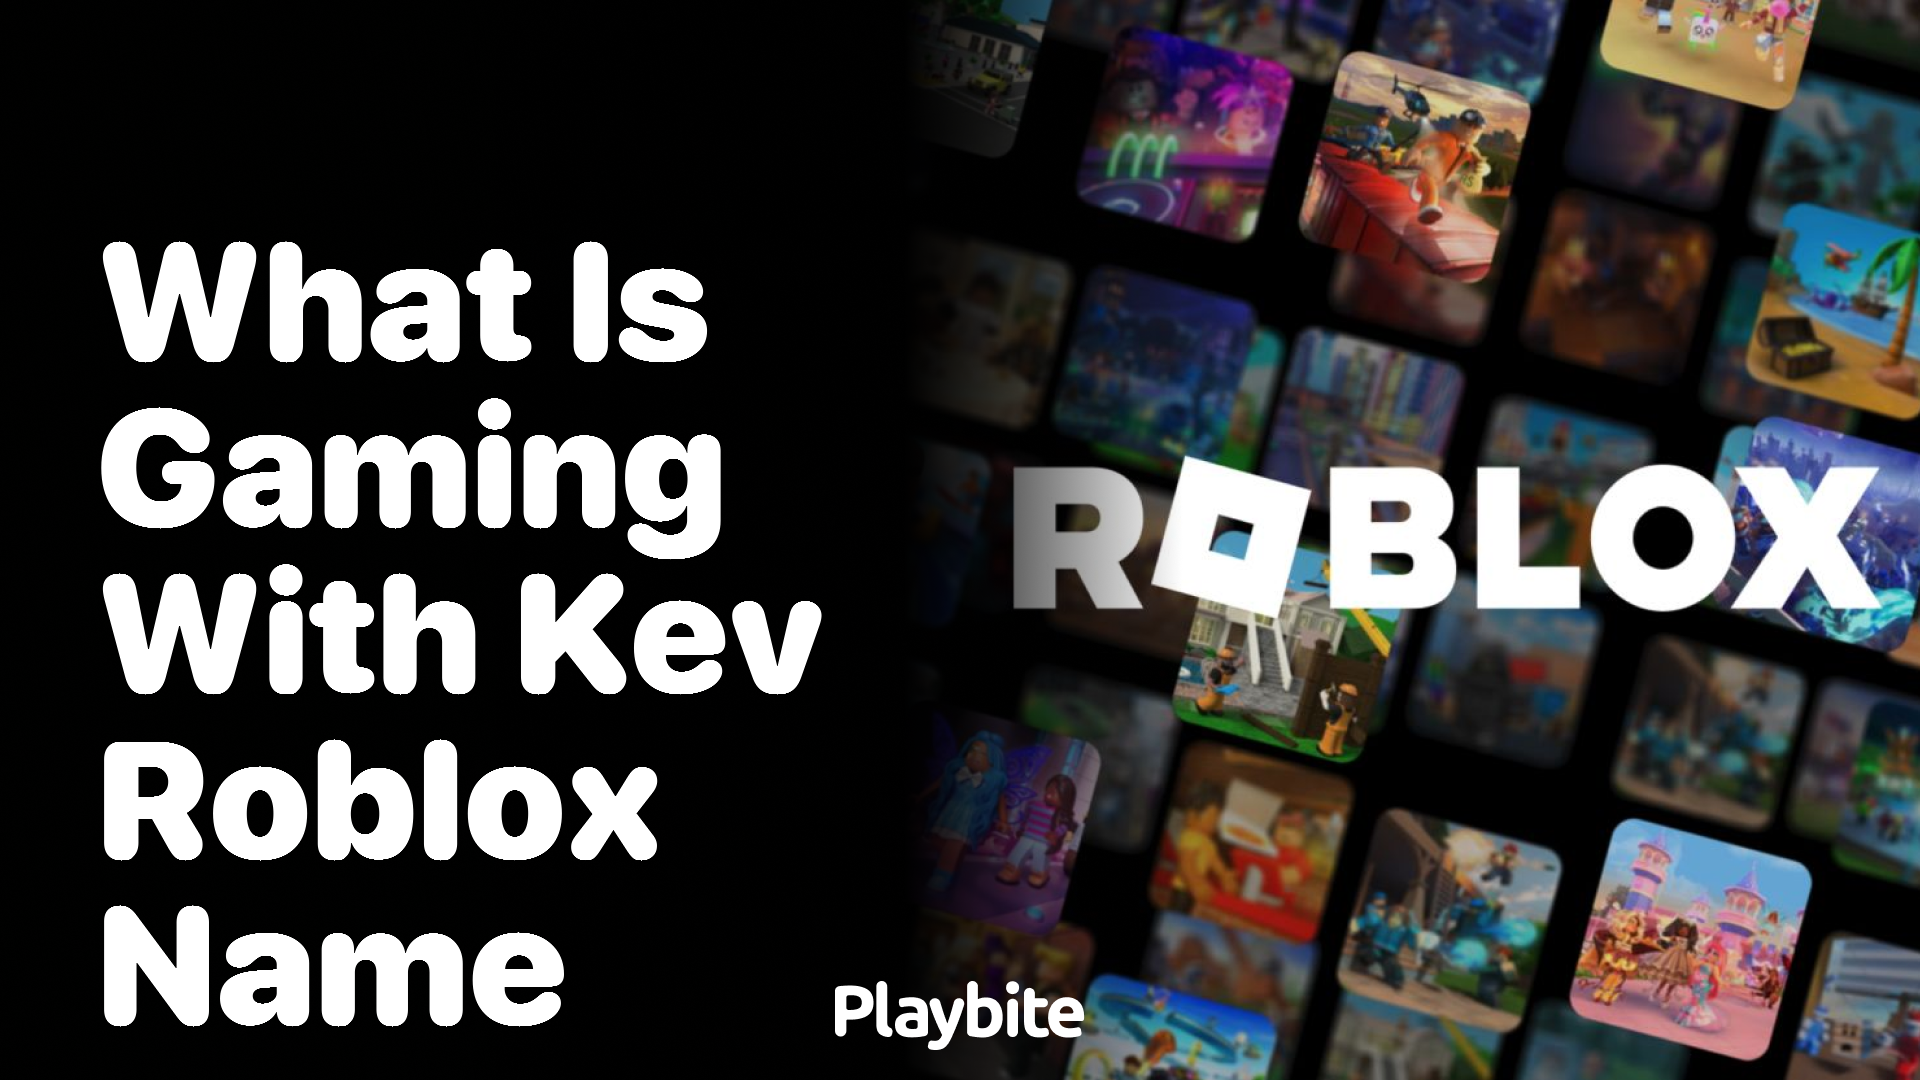 What is Gaming with Kev&#8217;s Roblox Name?